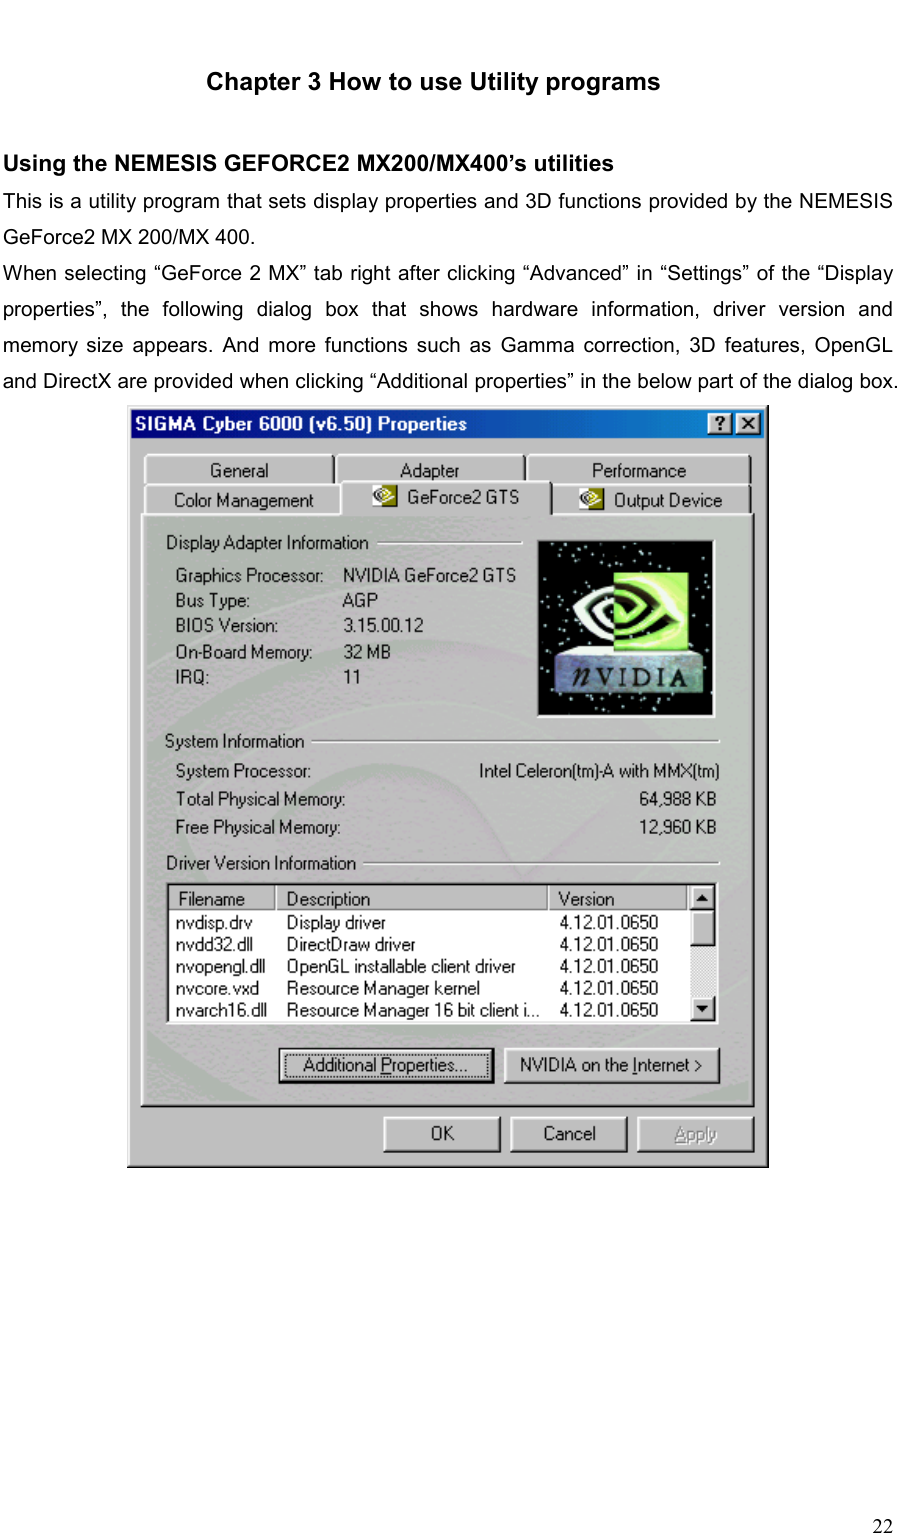     22  Chapter 3 How to use Utility programs   Using the NEMESIS GEFORCE2 MX200/MX400’s utilities This is a utility program that sets display properties and 3D functions provided by the NEMESIS GeForce2 MX 200/MX 400. When selecting “GeForce 2 MX” tab right after clicking “Advanced” in “Settings” of the “Display properties”, the following dialog box that shows hardware information, driver version and memory size appears. And more functions such as Gamma correction, 3D features, OpenGL and DirectX are provided when clicking “Additional properties” in the below part of the dialog box.   